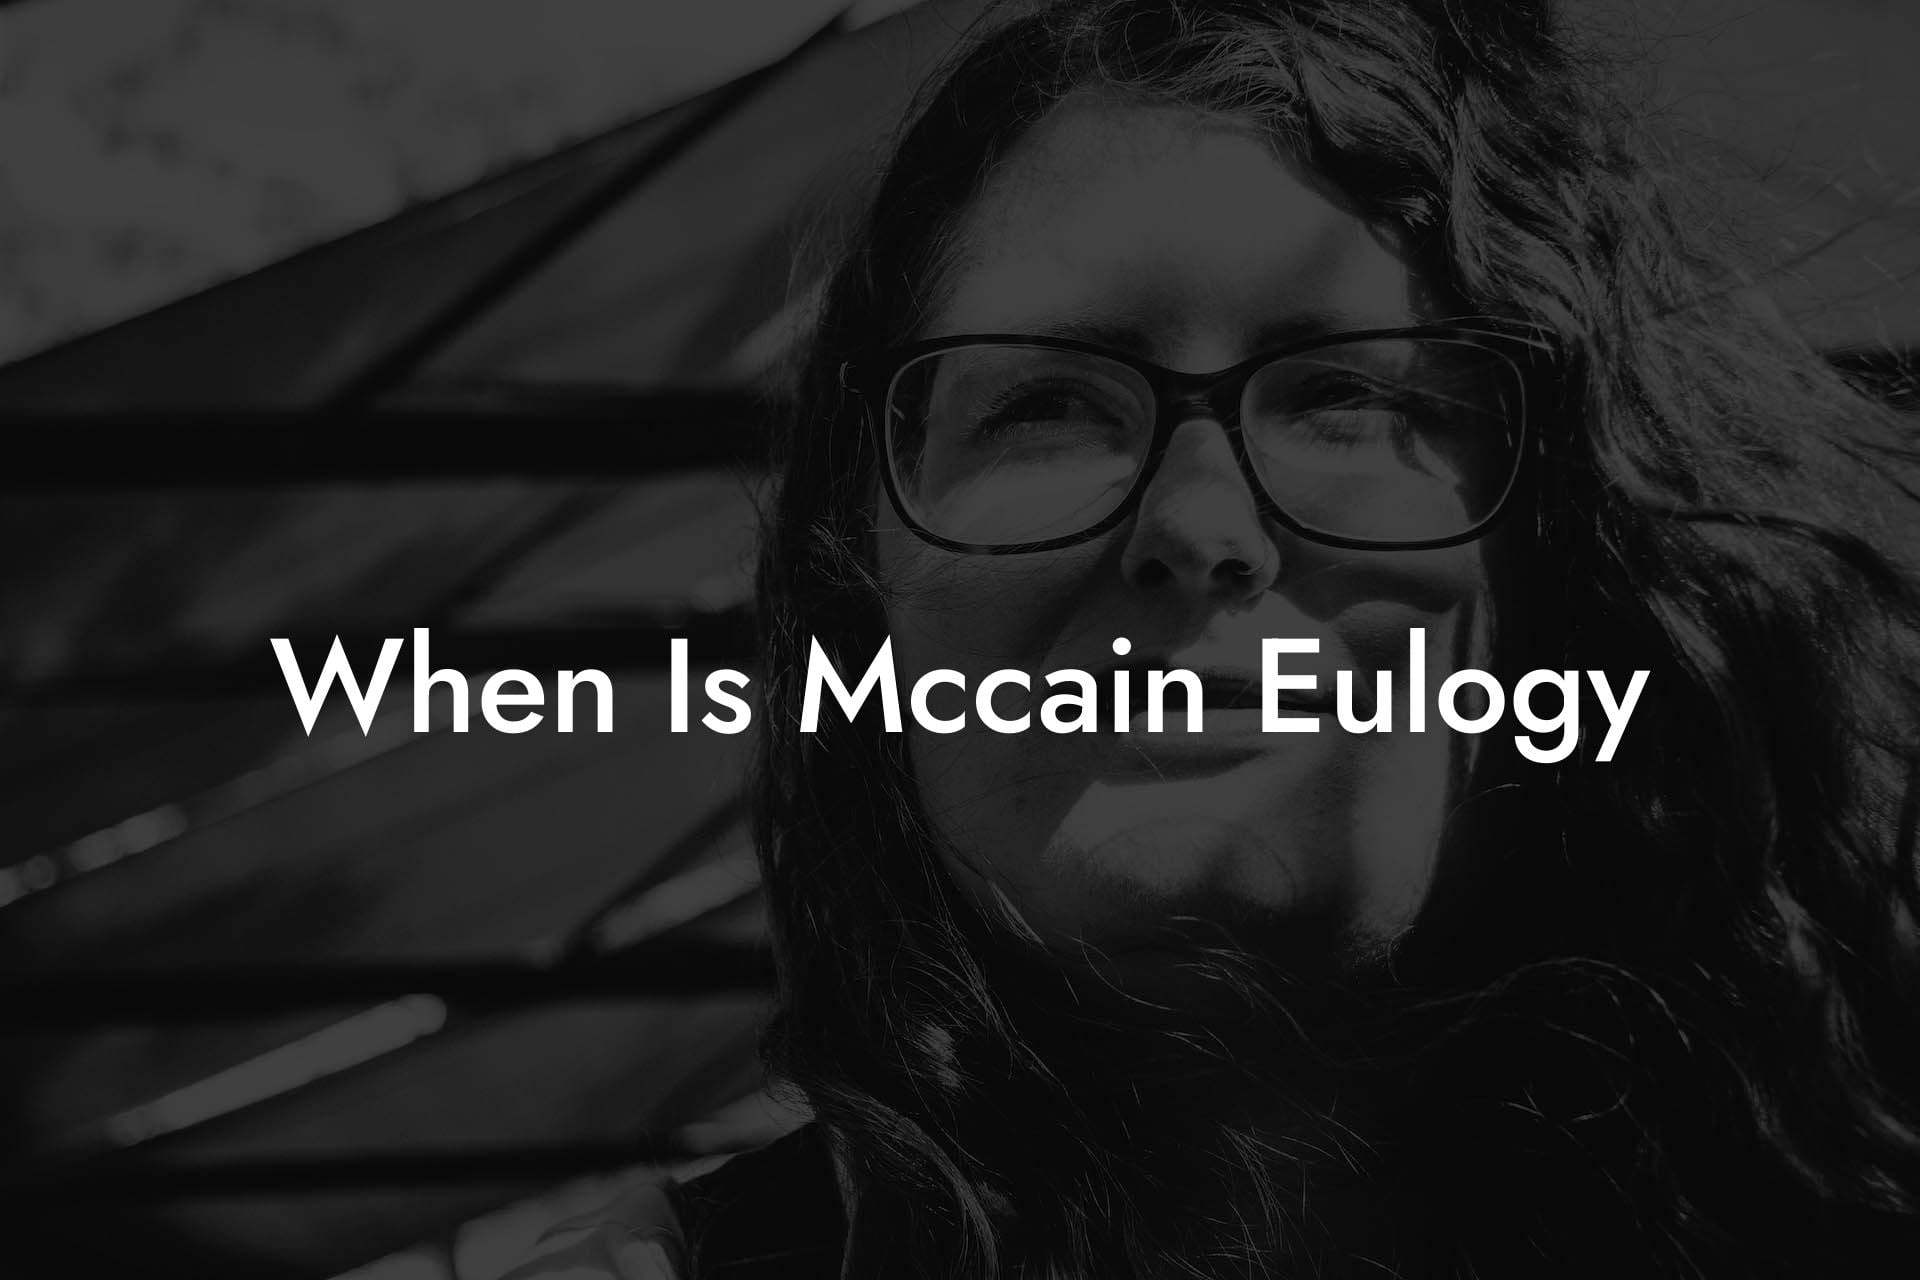 When Is Mccain Eulogy